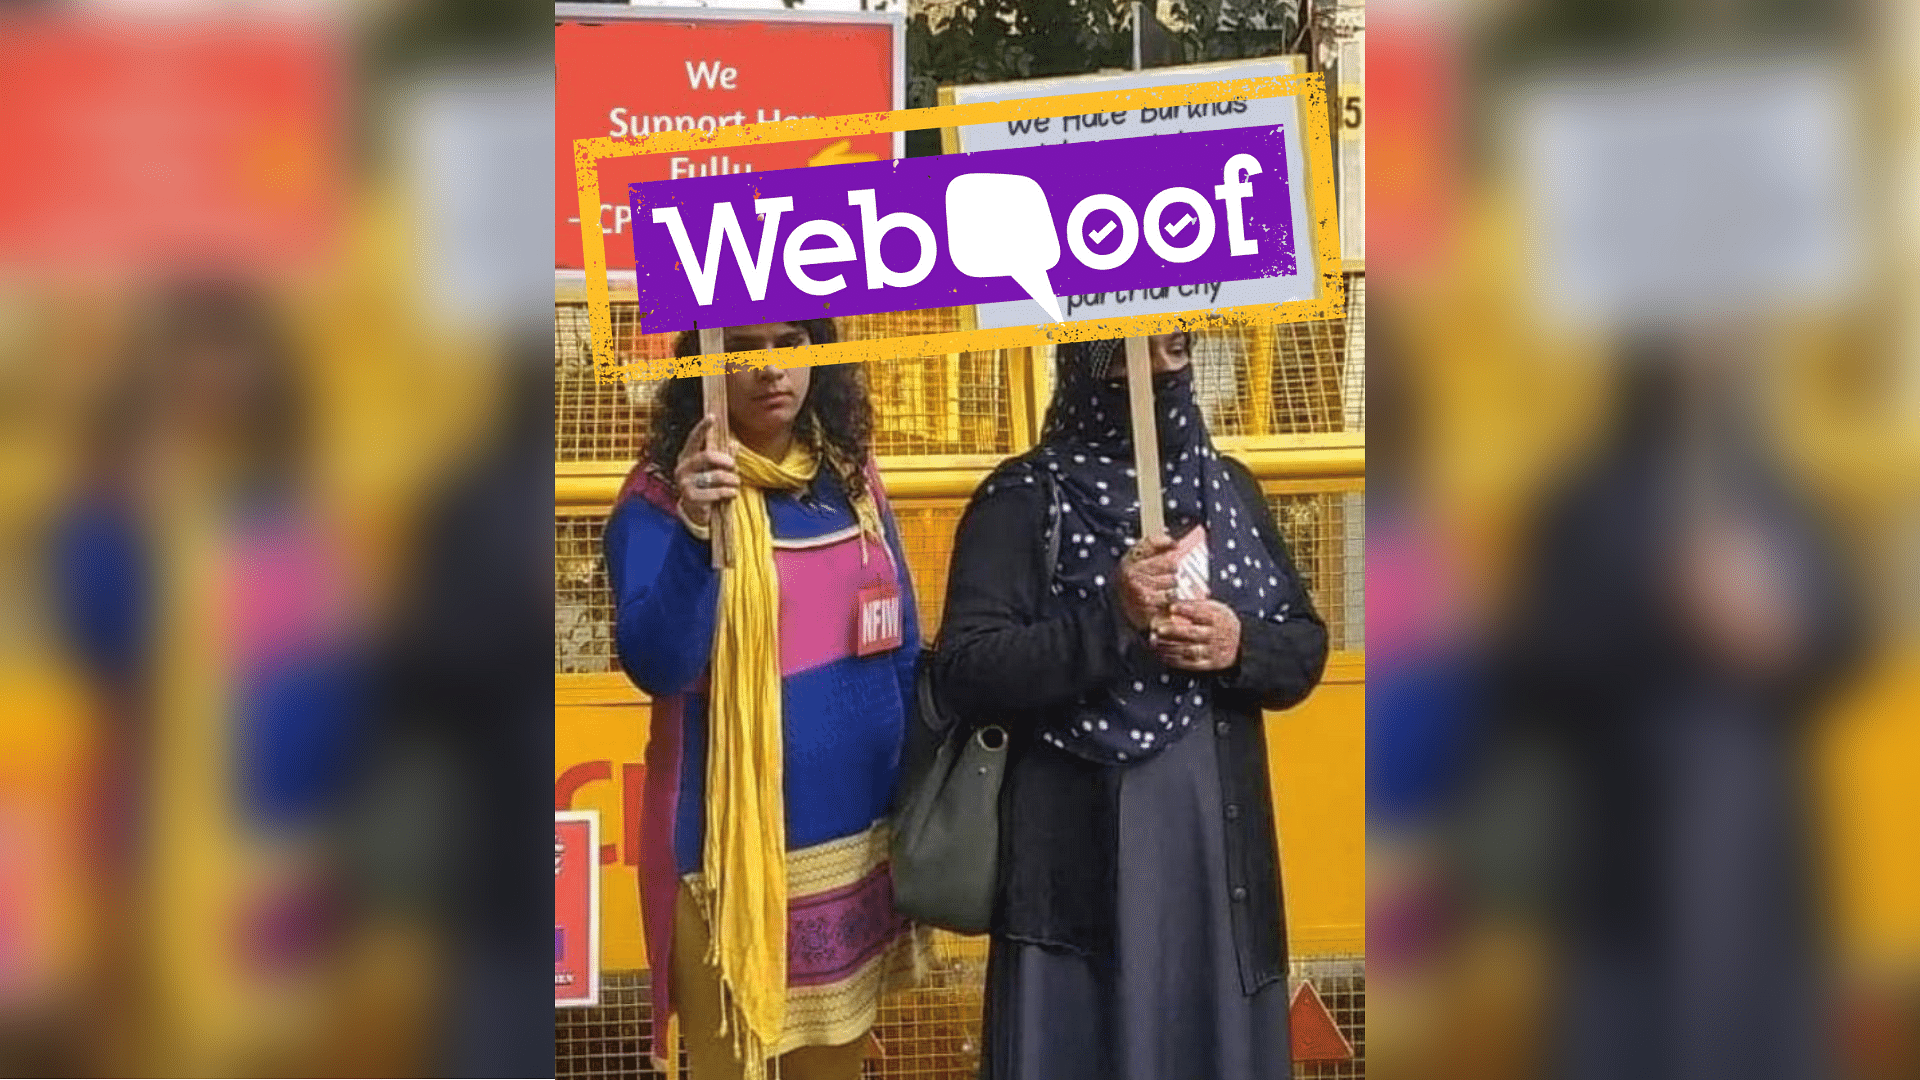 The photo of two women holding placards went viral, with many immediately taking to photoshop different claims on the placards.&nbsp;